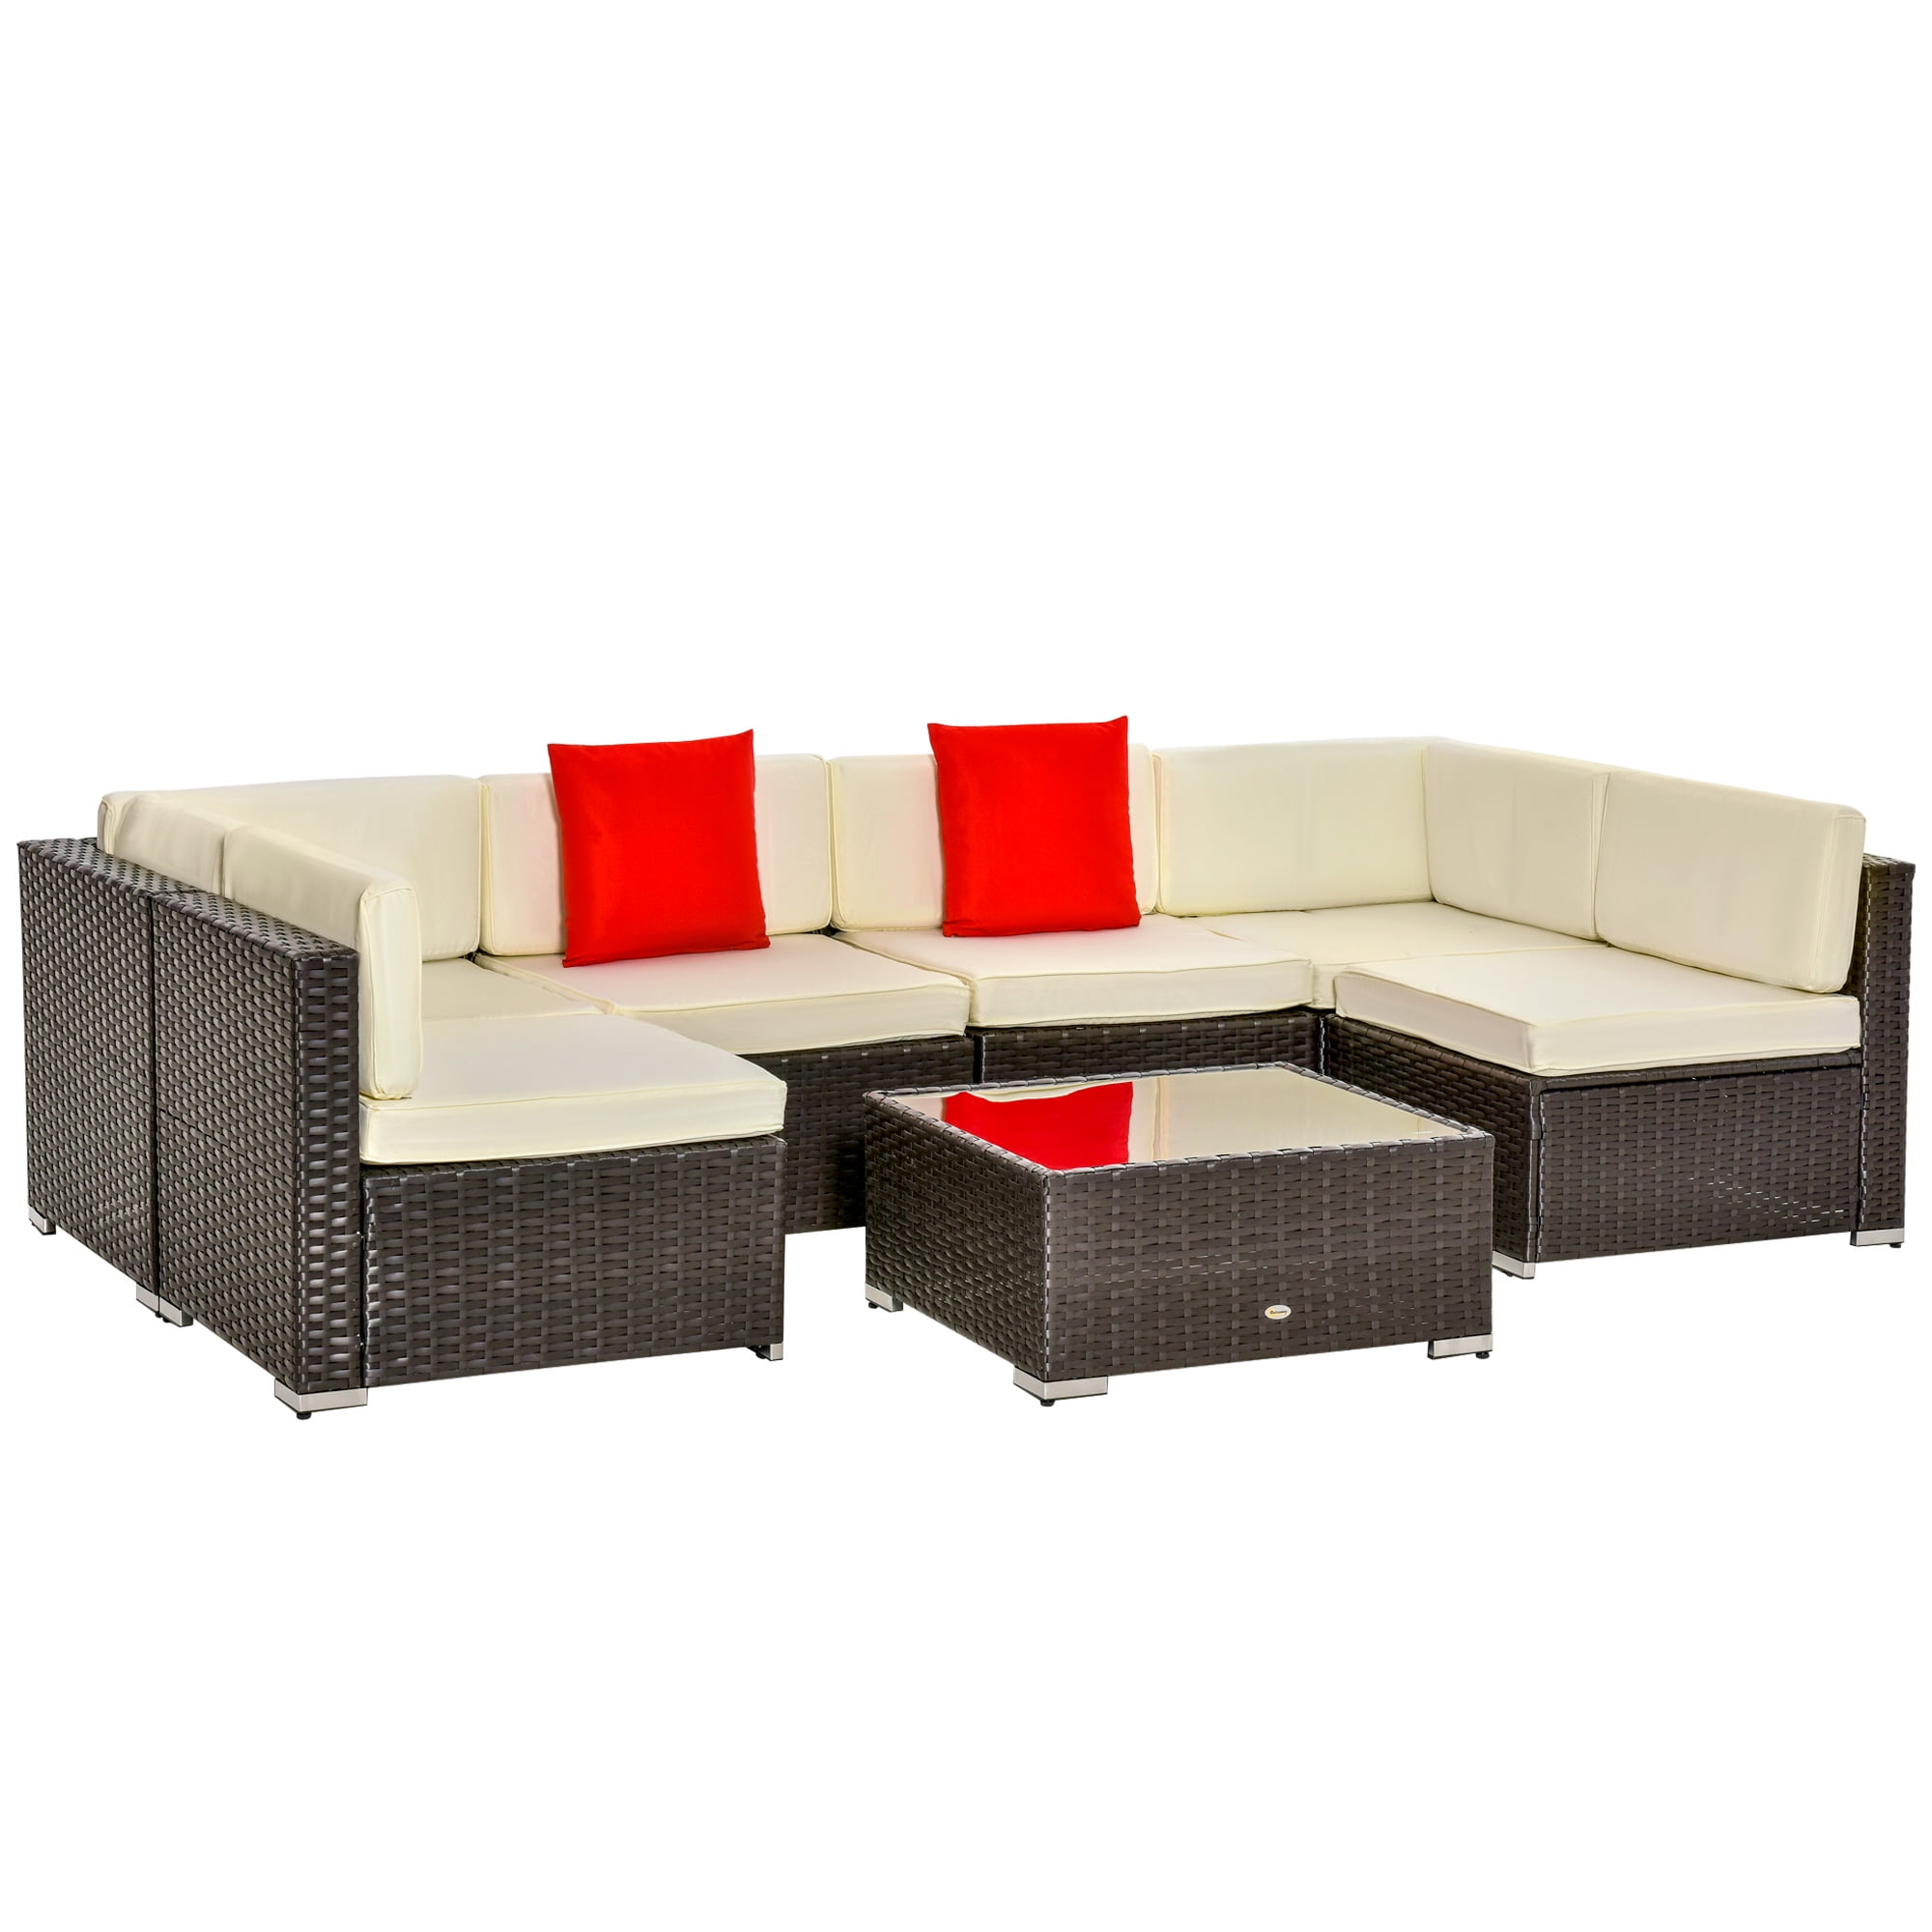 Outsunny 7-Piece Rattan Outdoor Patio Furniture Set with Coffee Table, Cream White